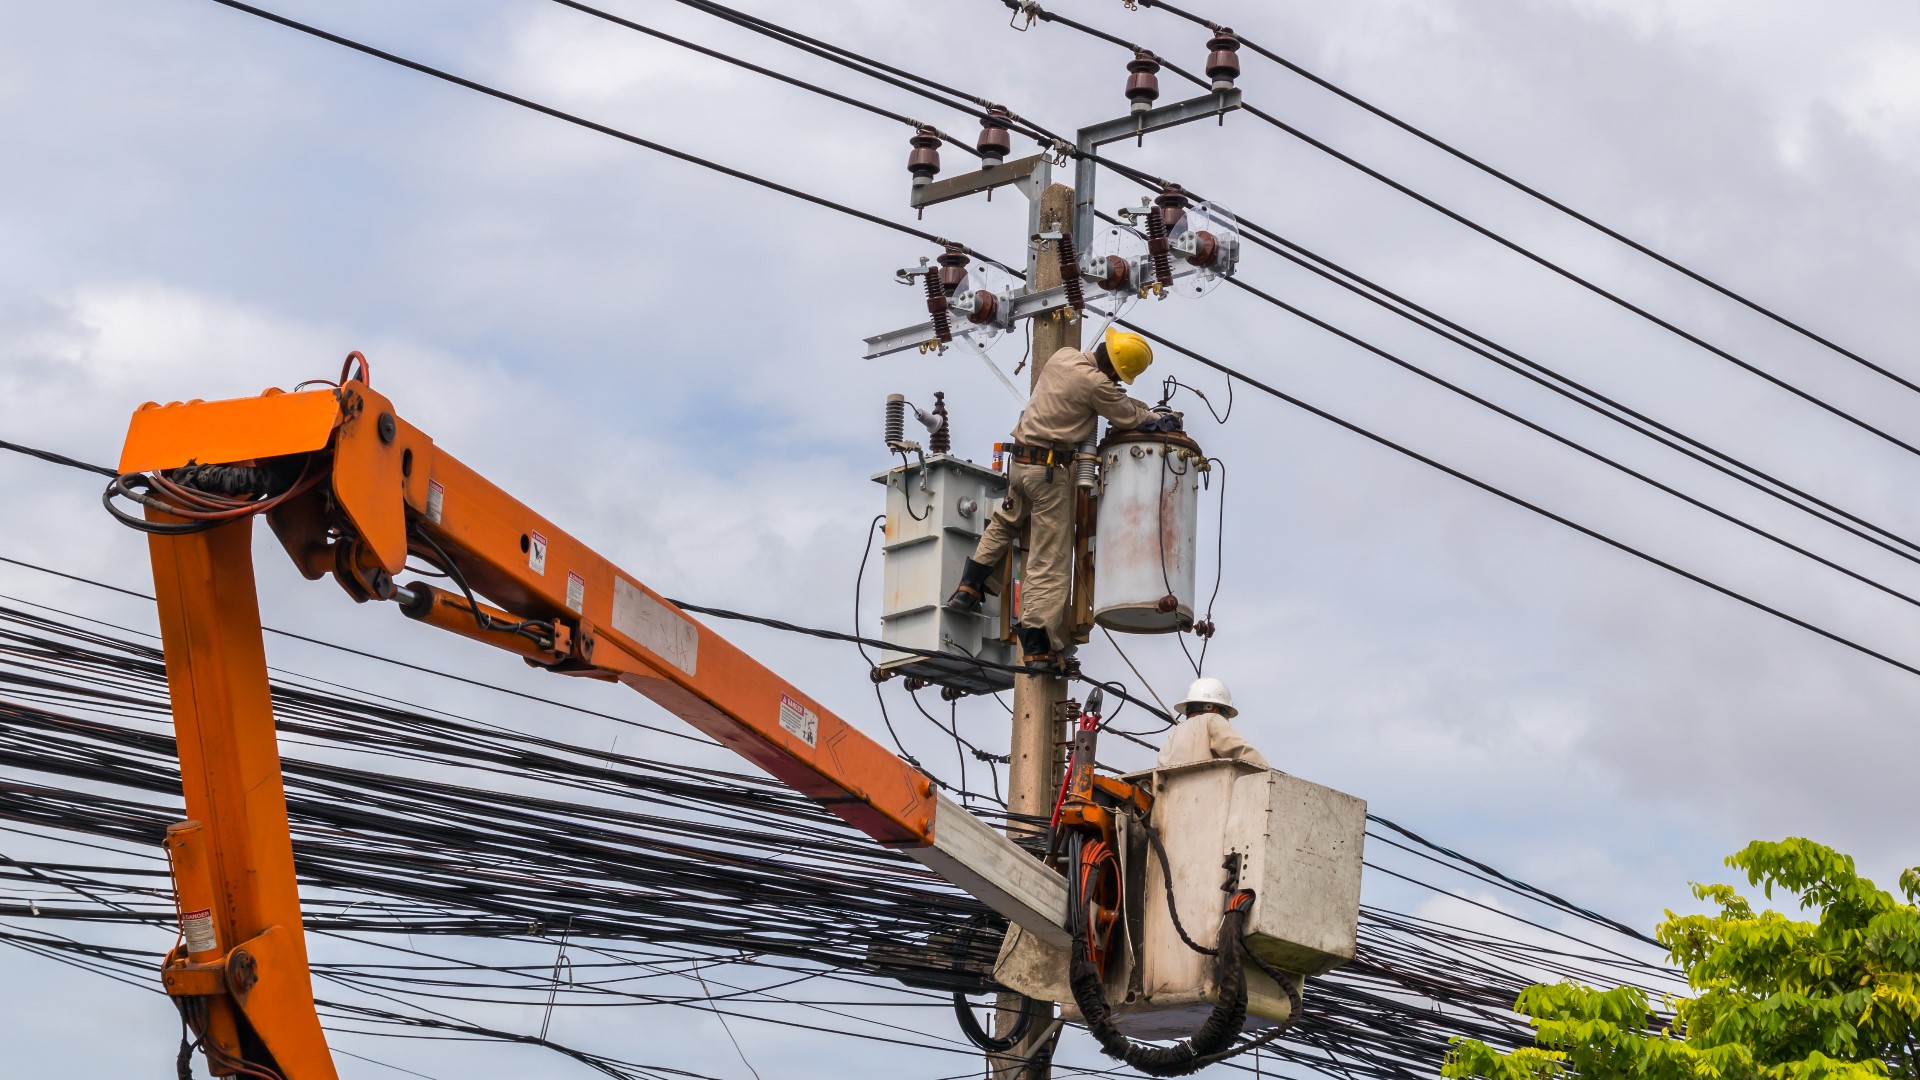 Over 600 power crews are still working to restore power in southern Michigan. They plan to move to the northern portion of the state later this week.